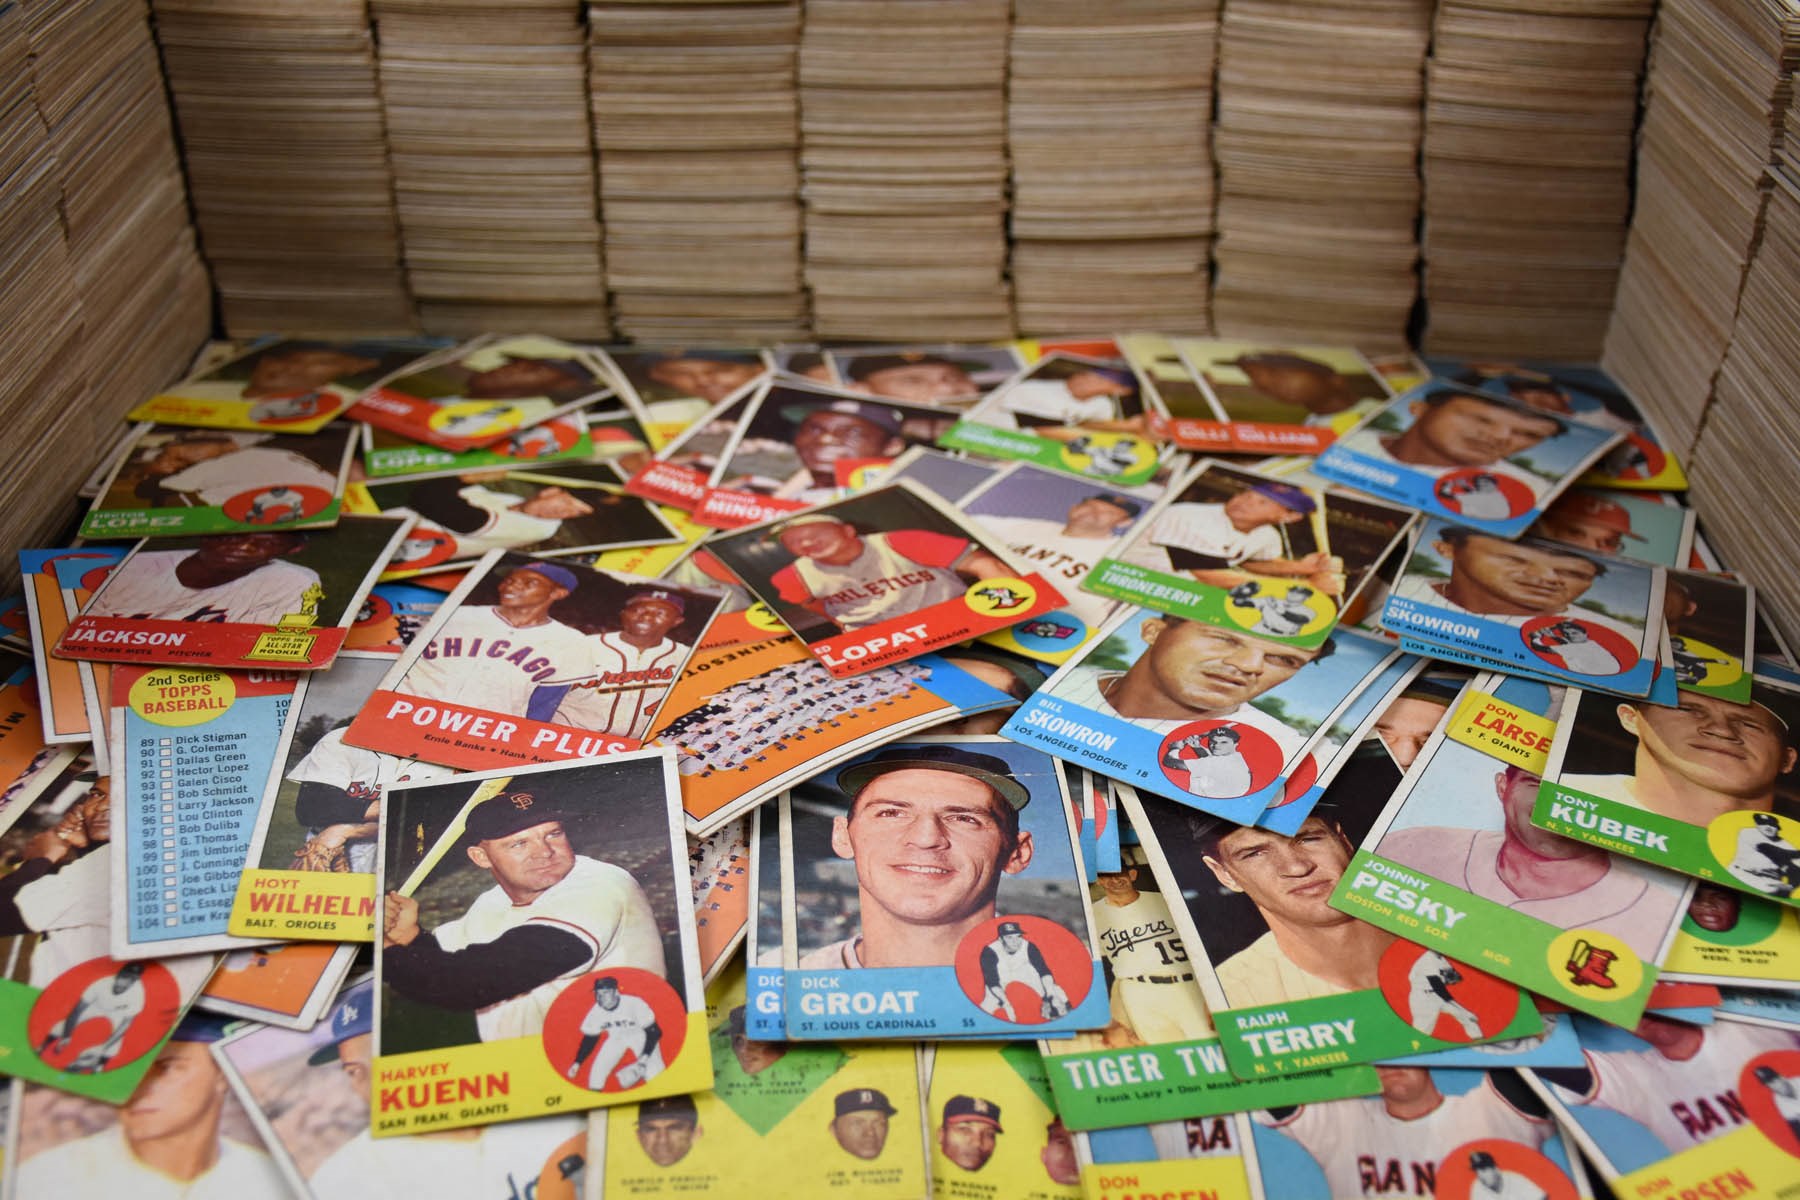 “The Hoarder” Collection - 1963 Topps Baseball Find (10,000+ cards)